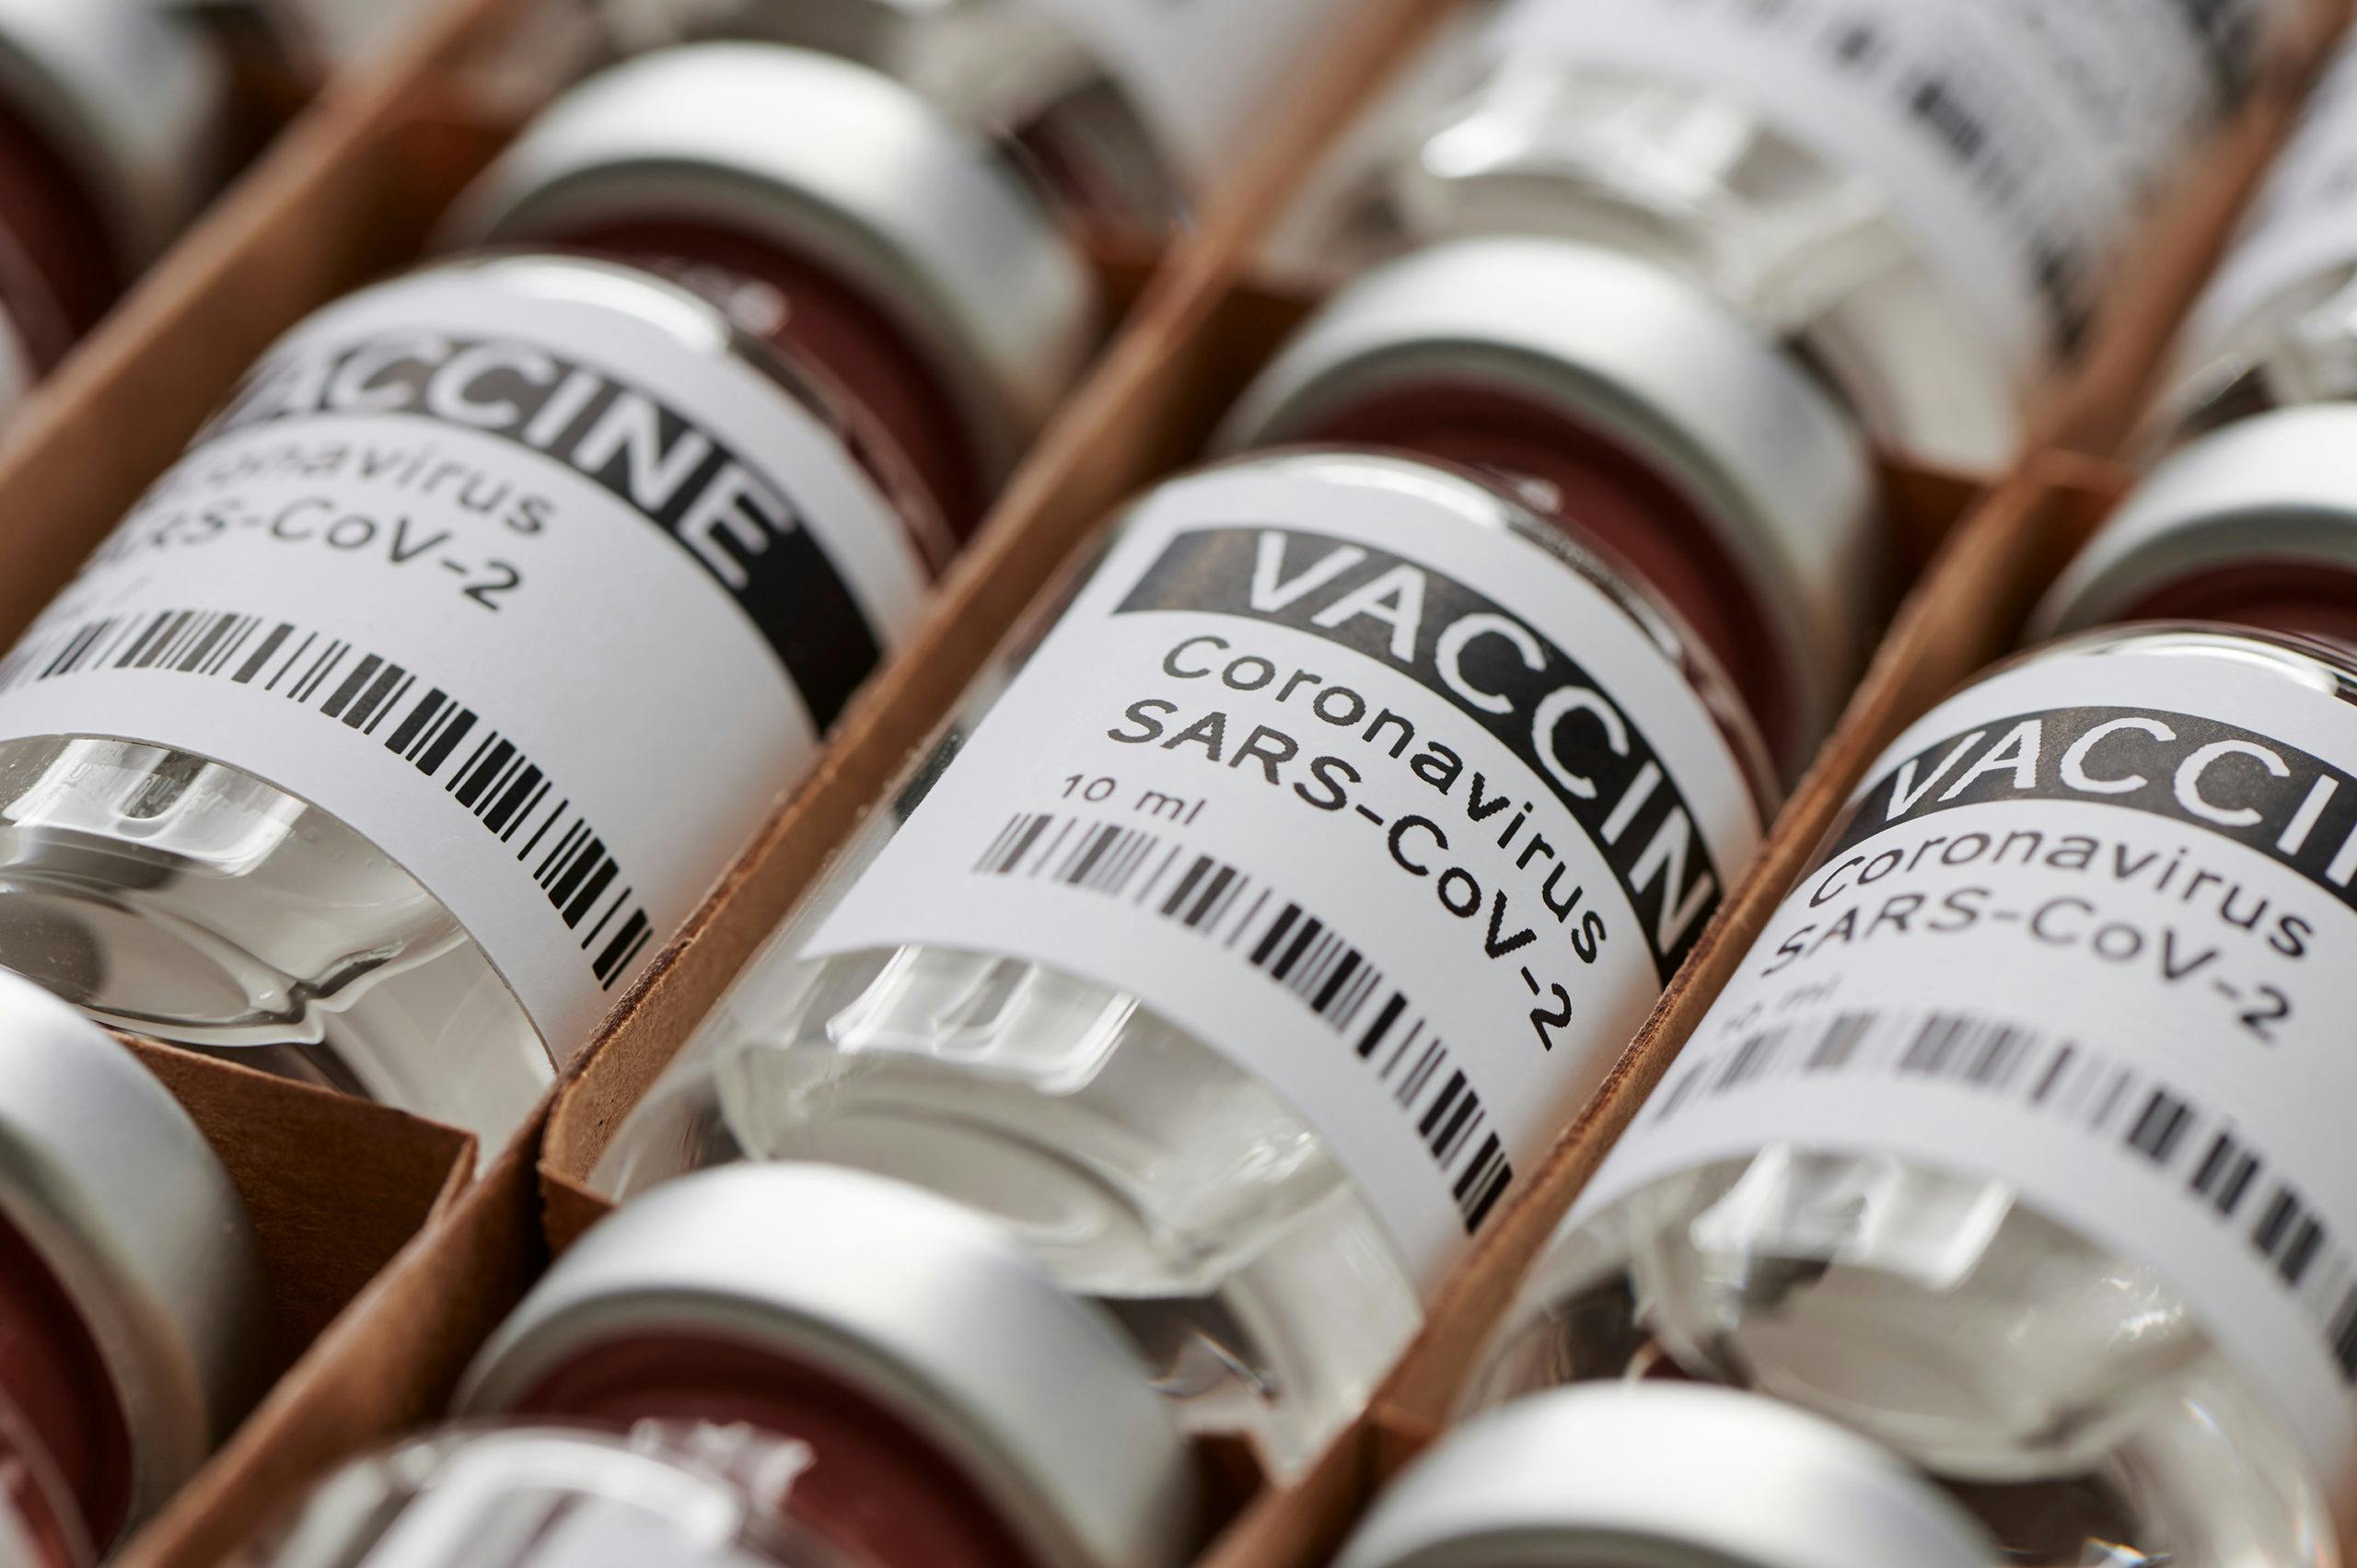 Close up image of vials of the coronavirus vaccine neatly organized in a box.